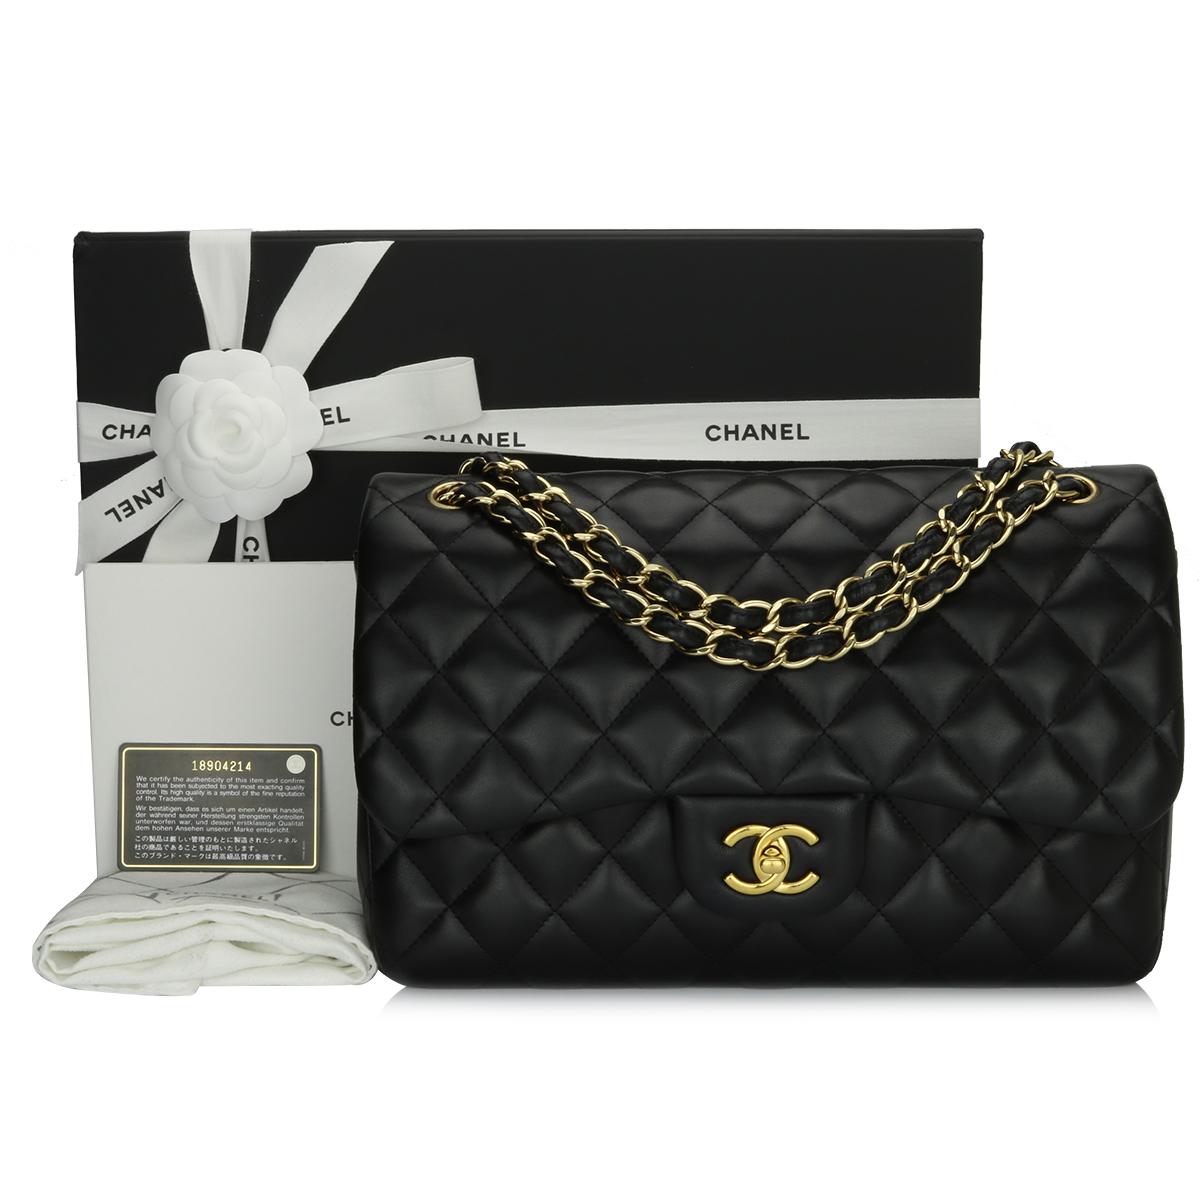 Authentic CHANEL Classic Jumbo Double Flap Black Lambskin with Gold Hardware 2014.

This stunning bag is in excellent condition, the bag still holds its shape very well, and the hardware is still very shiny.

Exterior Condition: Excellent condition,